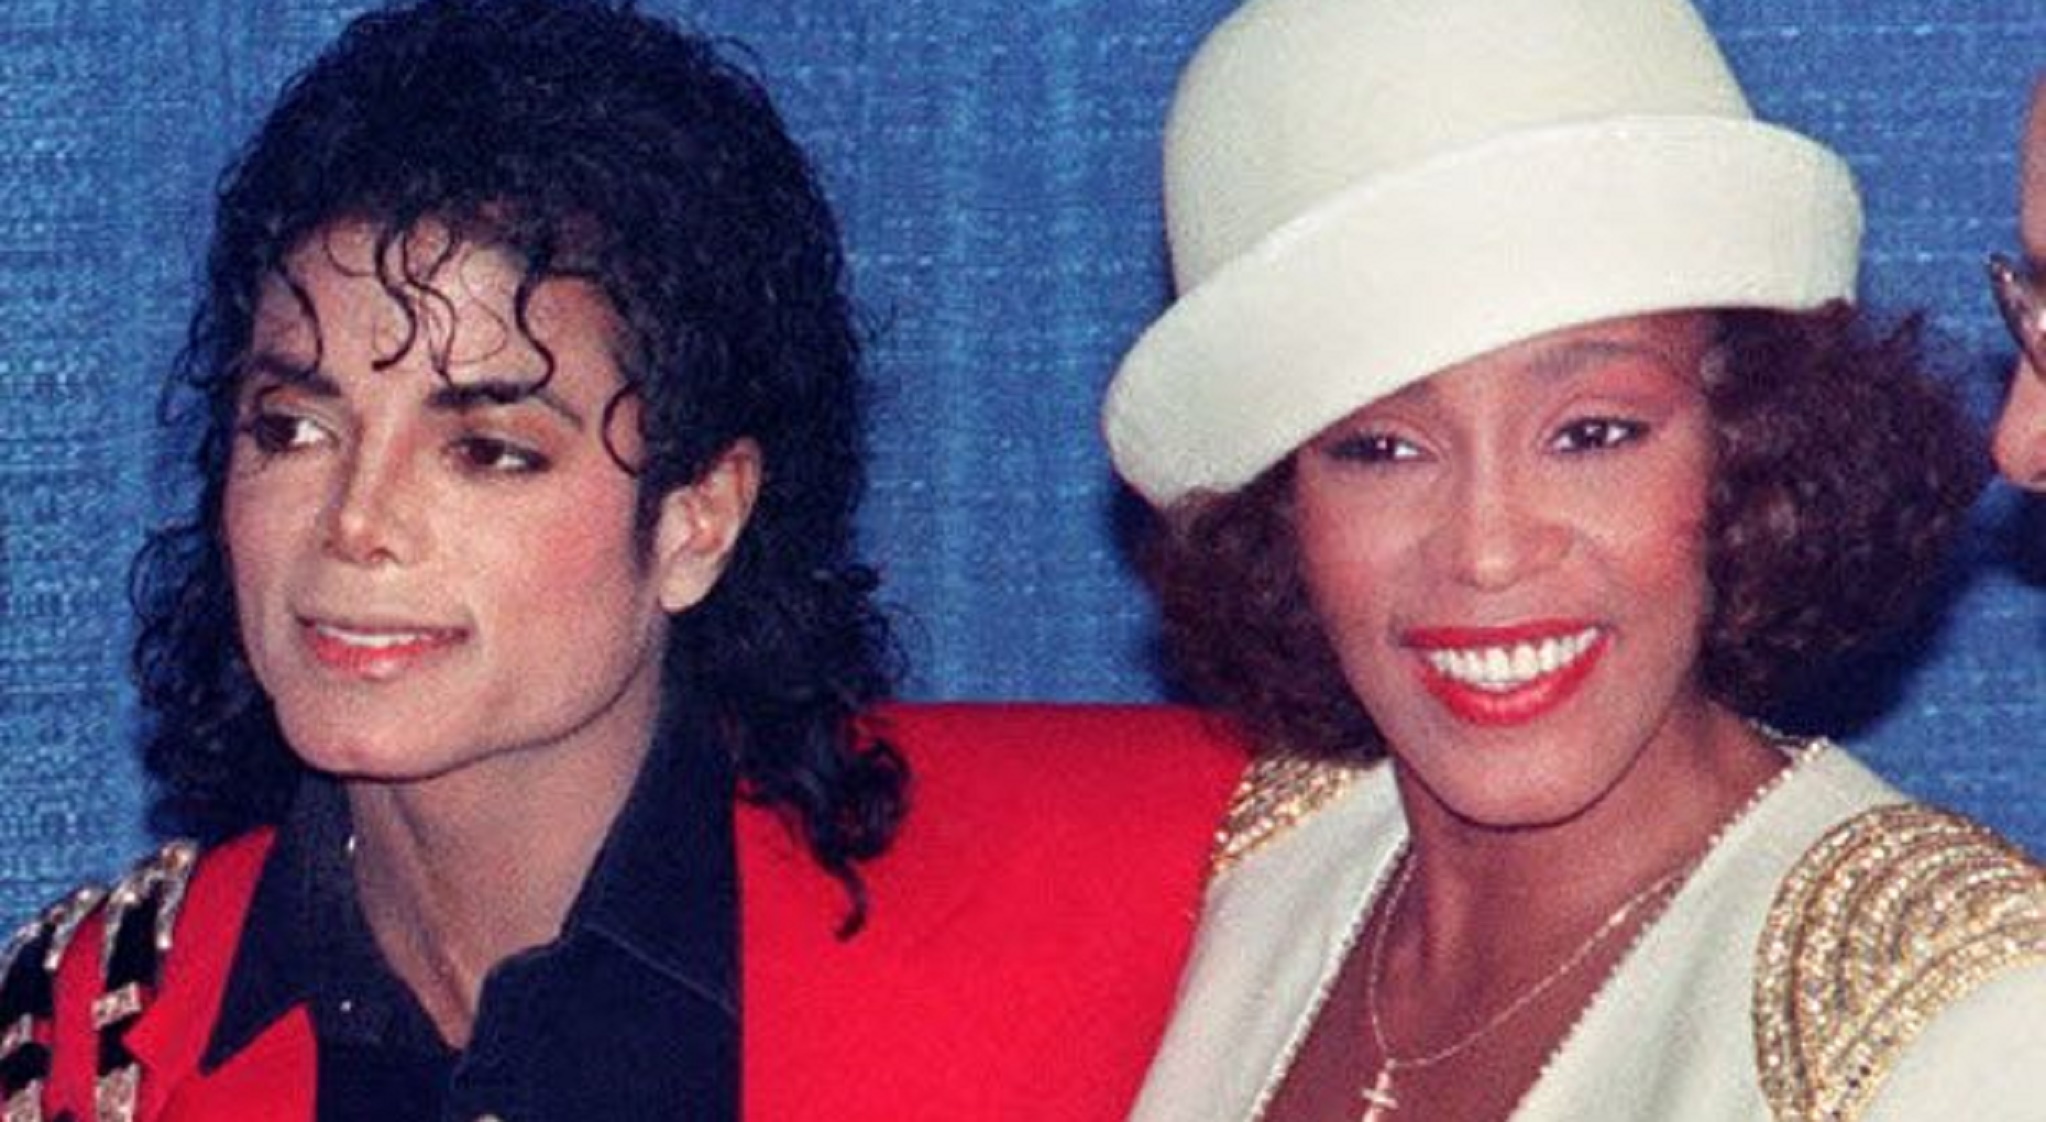 Listen to Whitney Houston’s EPIC cover of Michael Jackson’s “Wanna Be Starting Something”